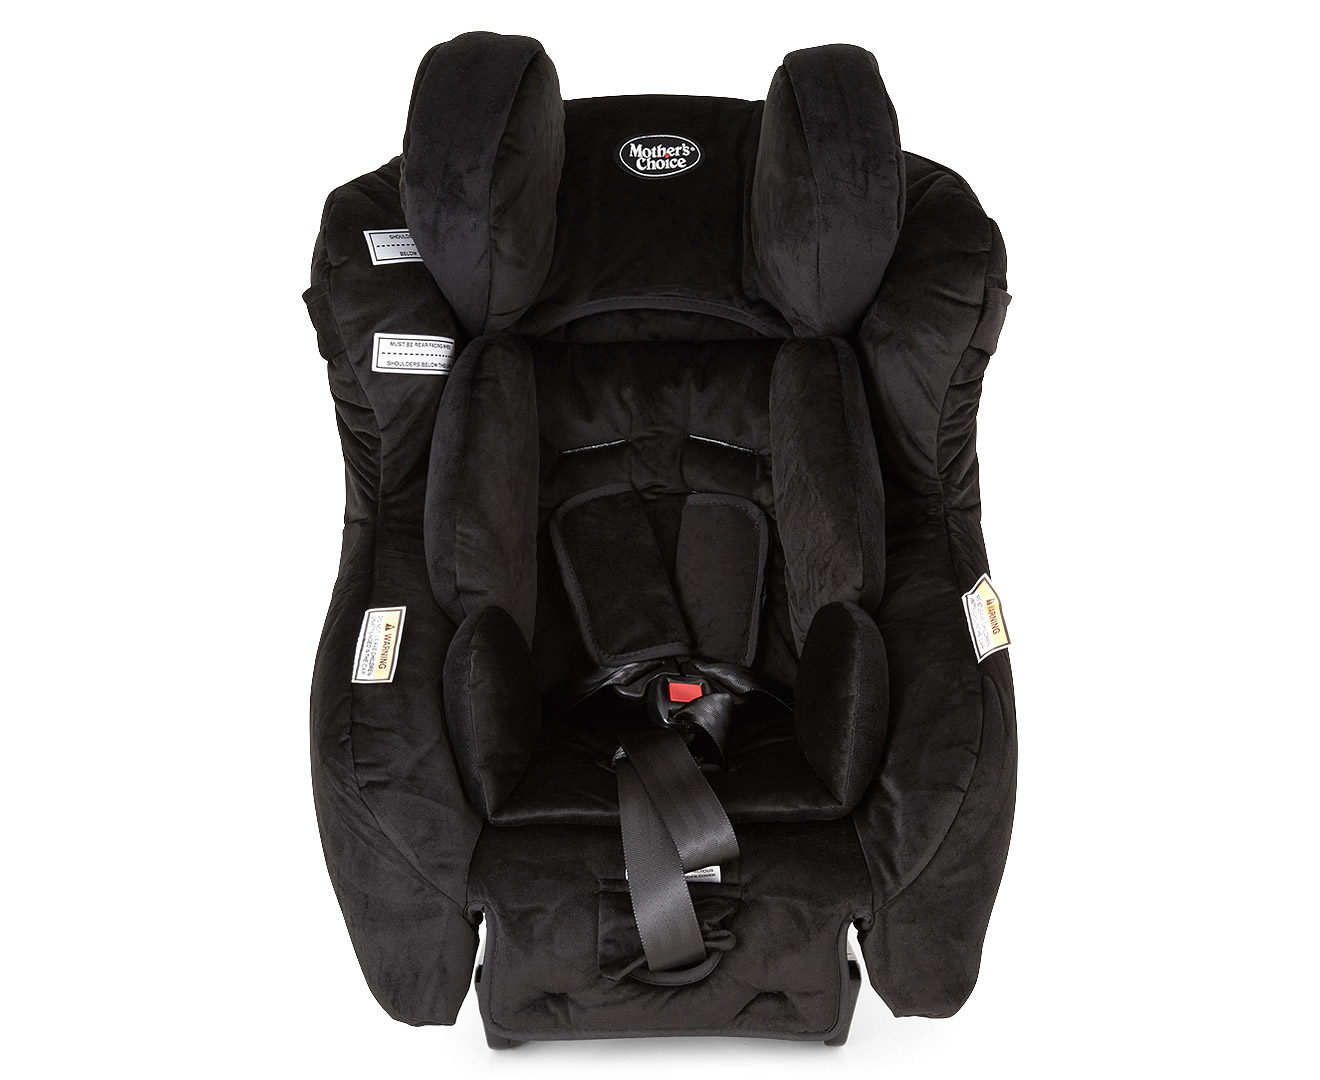 Mother's Choice Champion Convertible Car Seat - Black